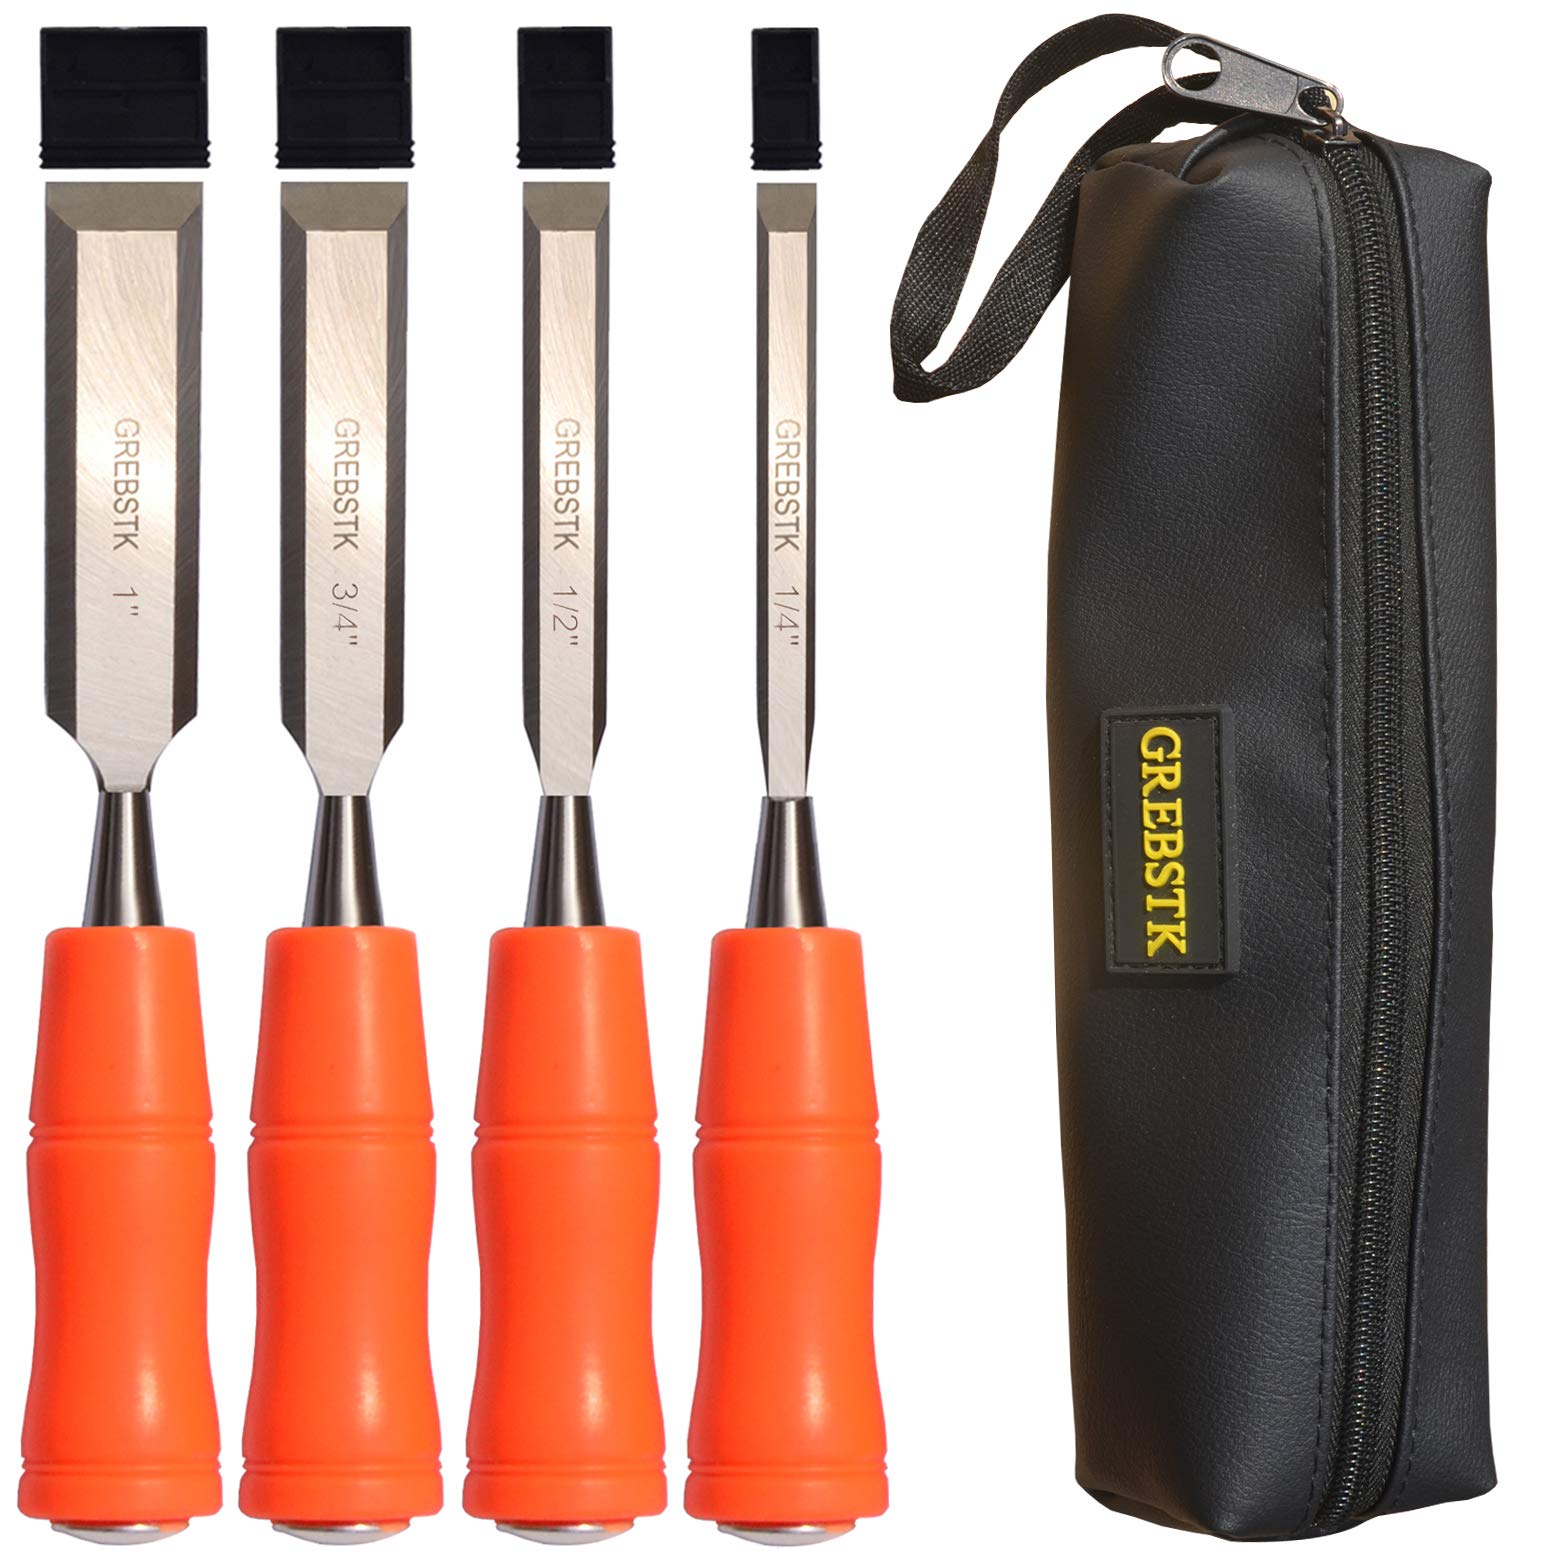 GREBSTK Professional Wood Chisel Tool Sets Sturdy Beech Wood Handles and  Chrome Vanadium Stainless Steel Woodworking Tools